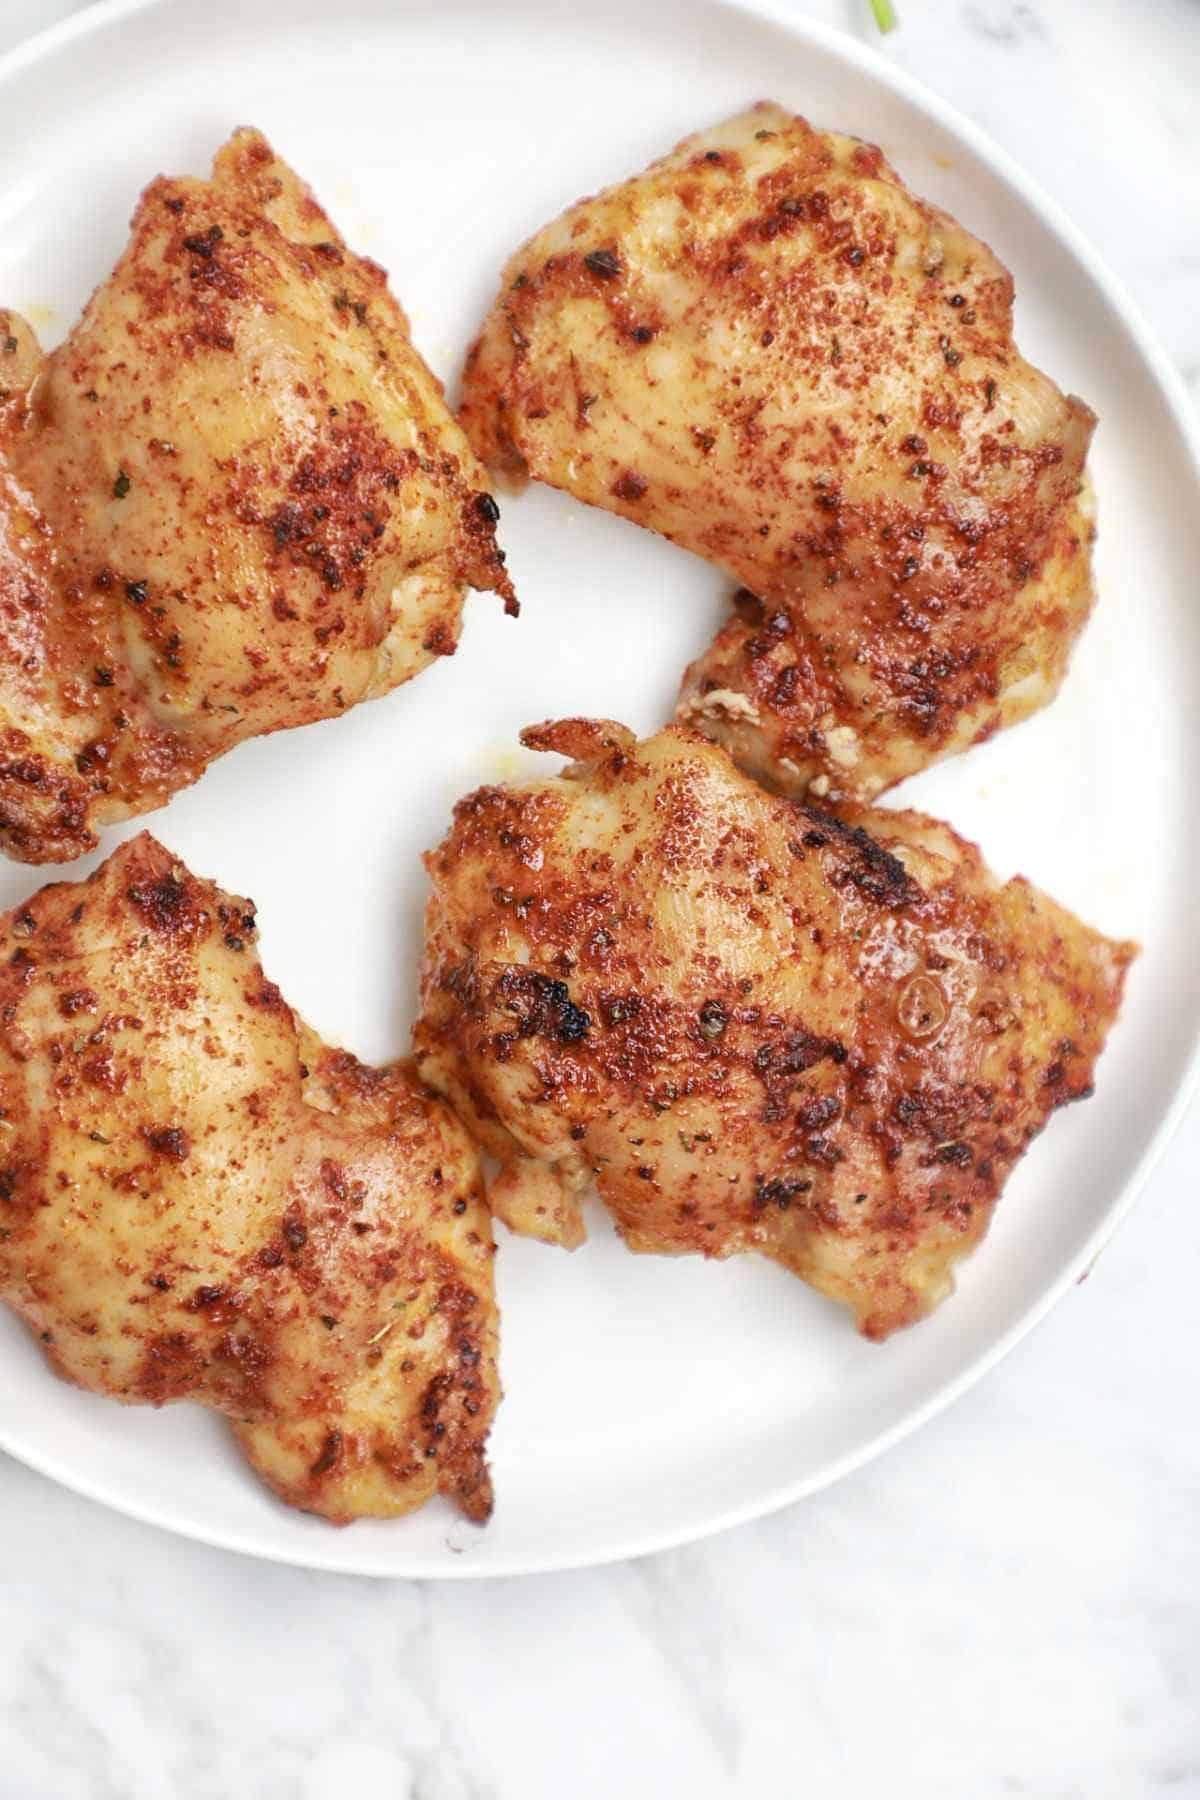 4 baked chicken thighs on a white plate.